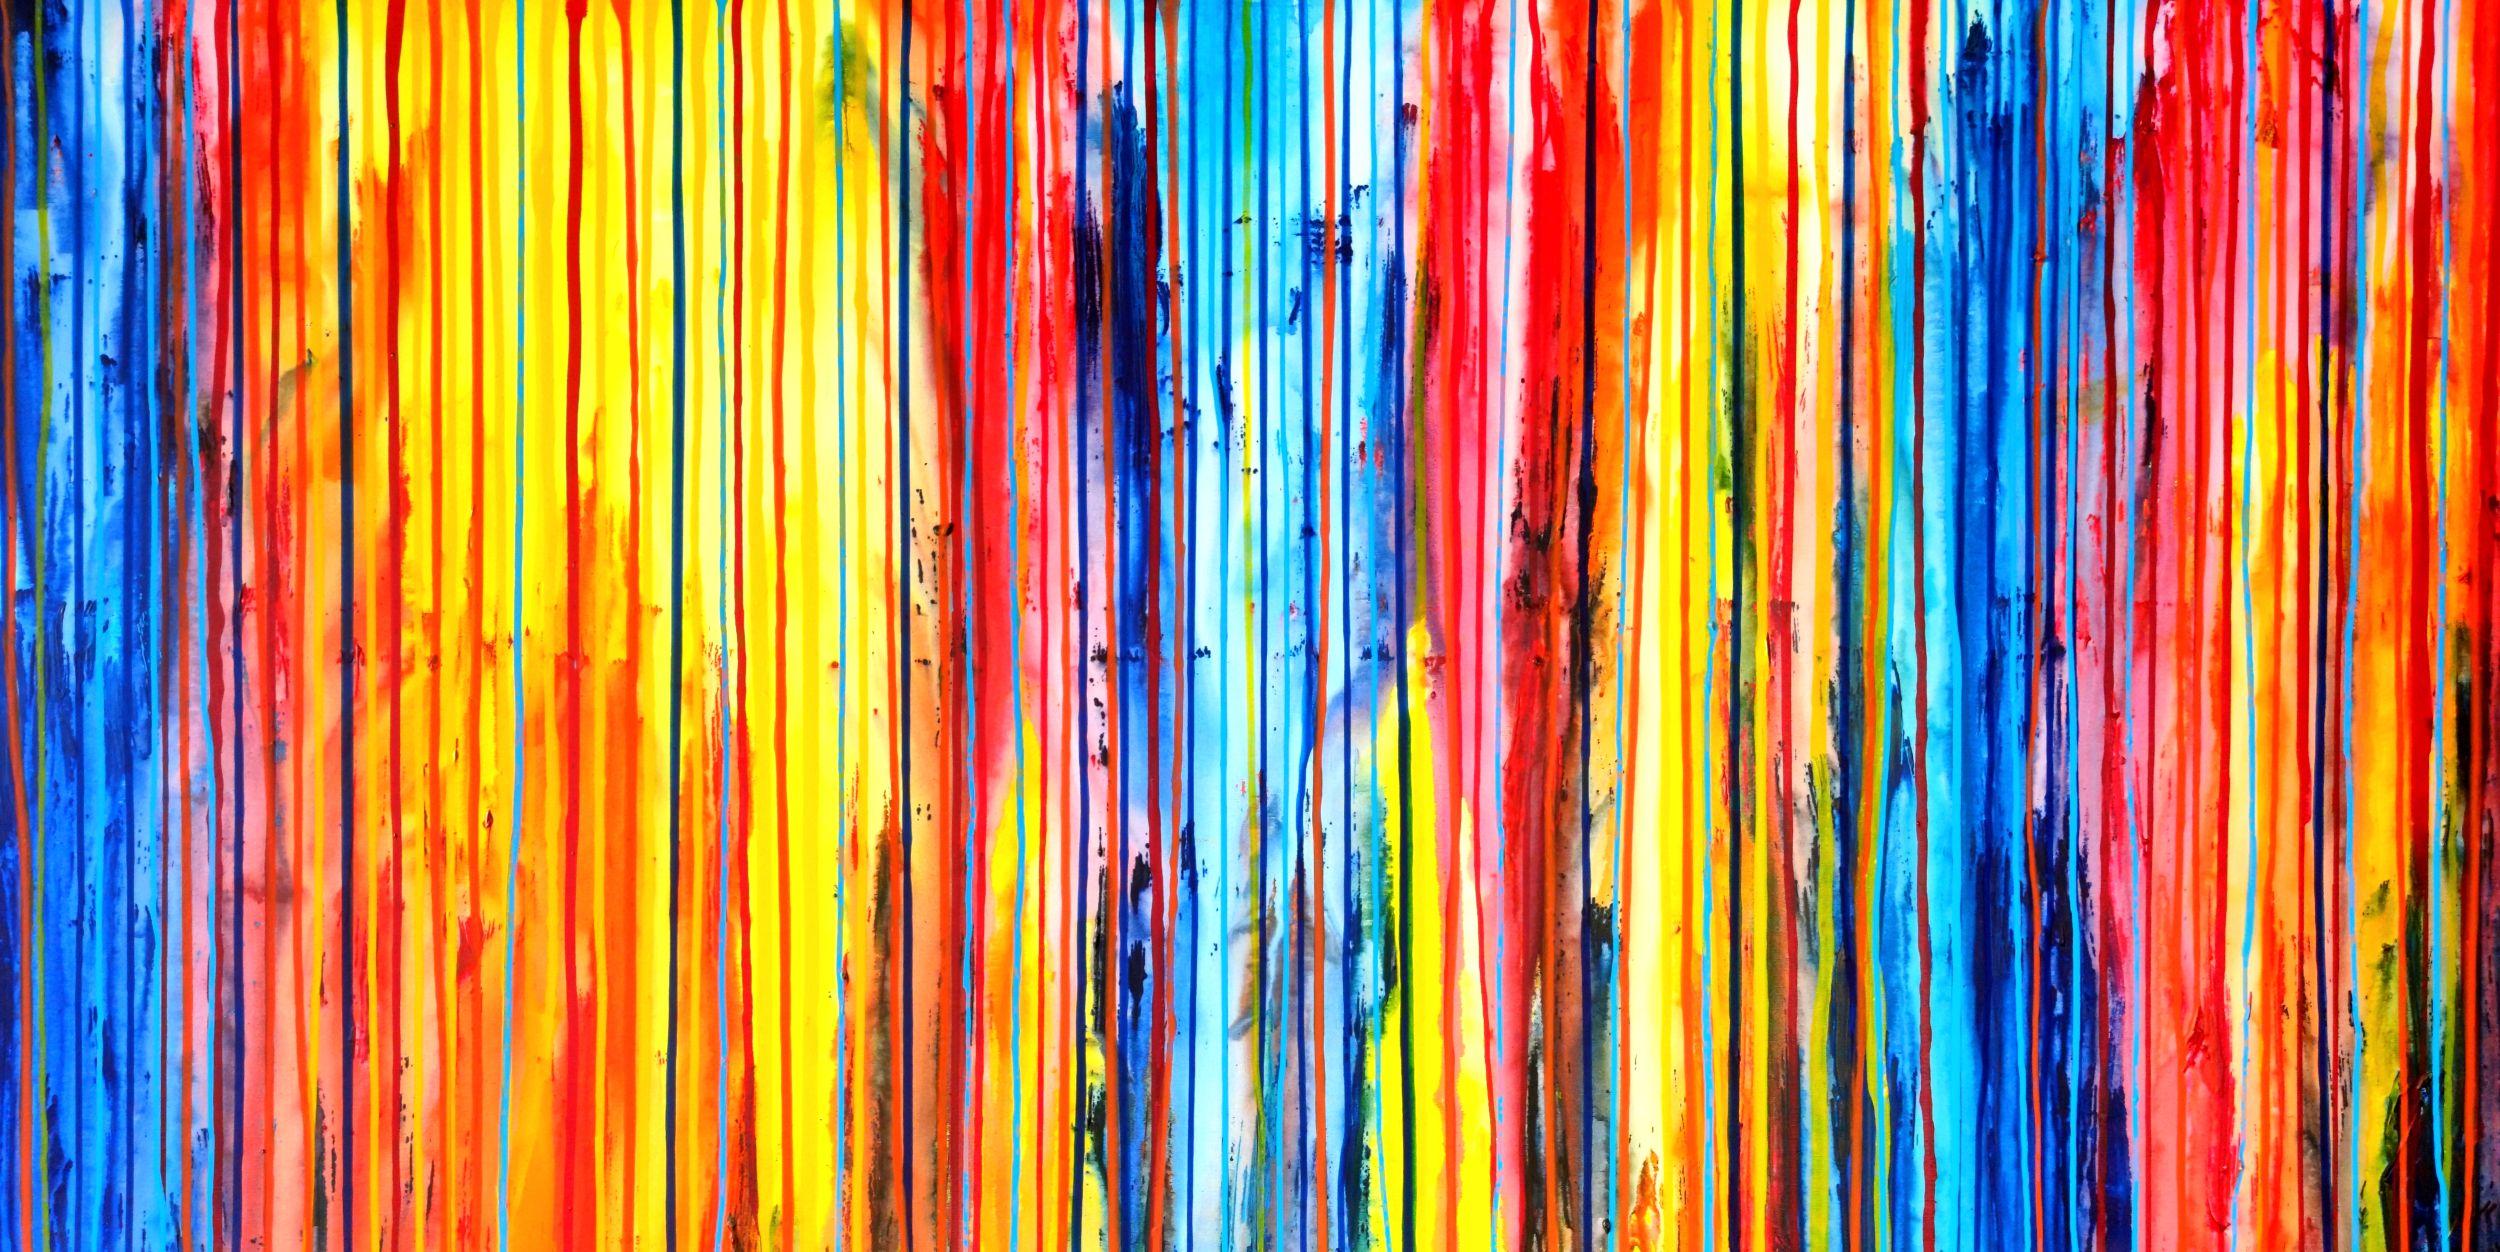 Carla Sá Fernandes Abstract Painting - The Emotional Creation #292, Painting, Acrylic on Canvas